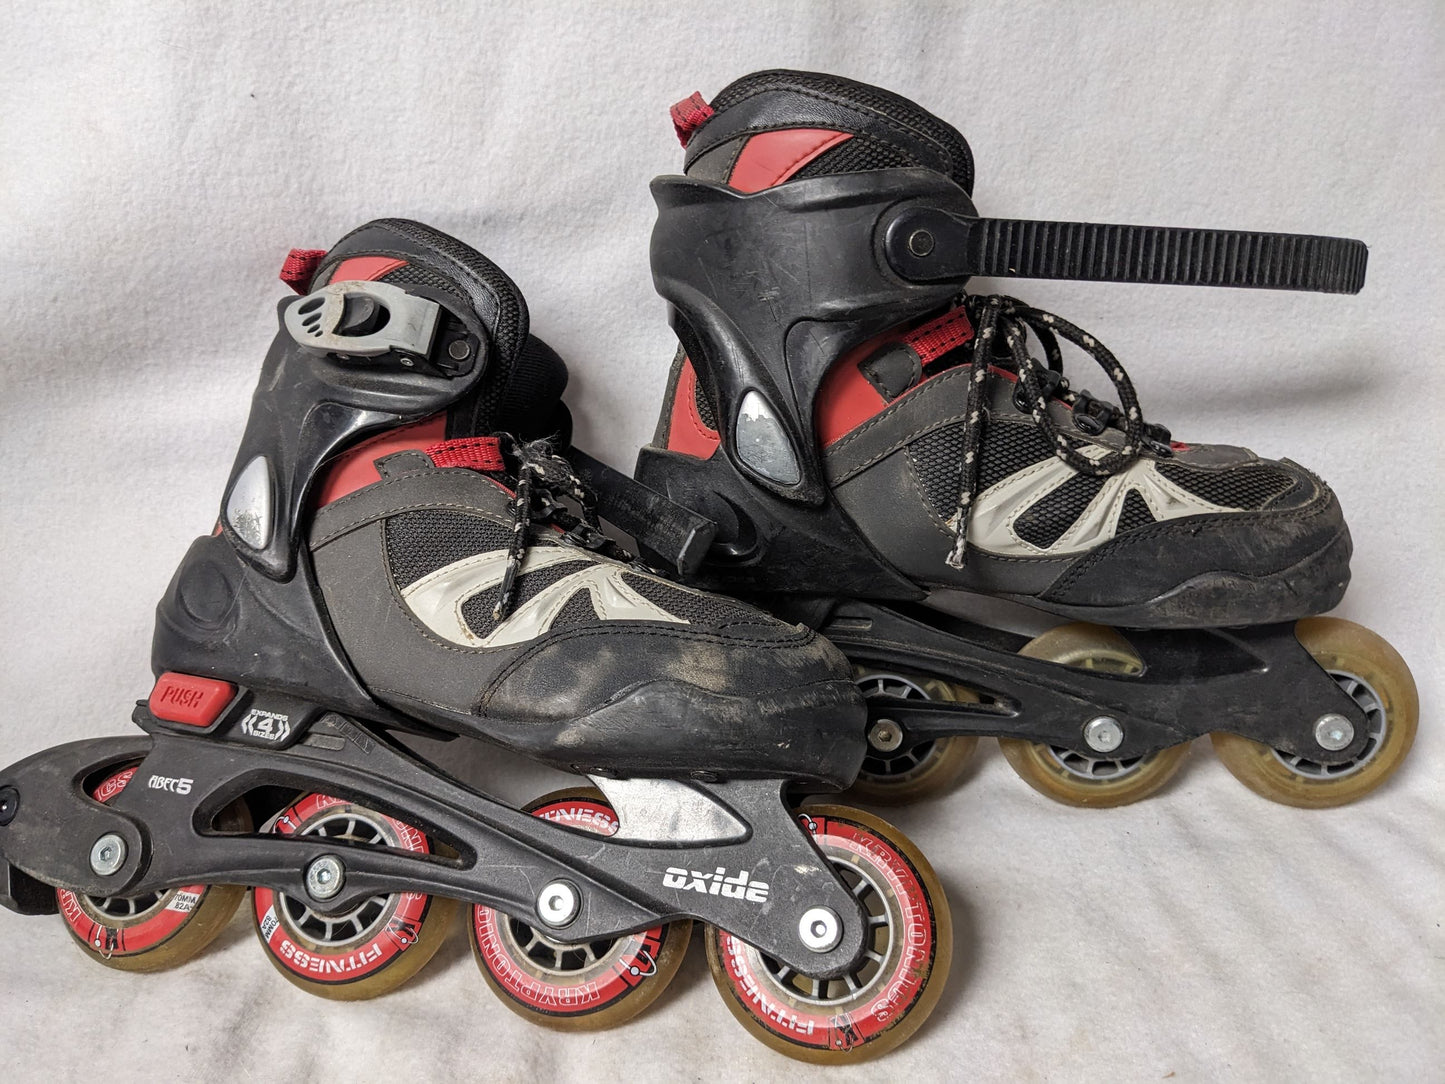 Oxide Youth Adjustable In-Line Skates Size 1-4 Color Black Condition Used